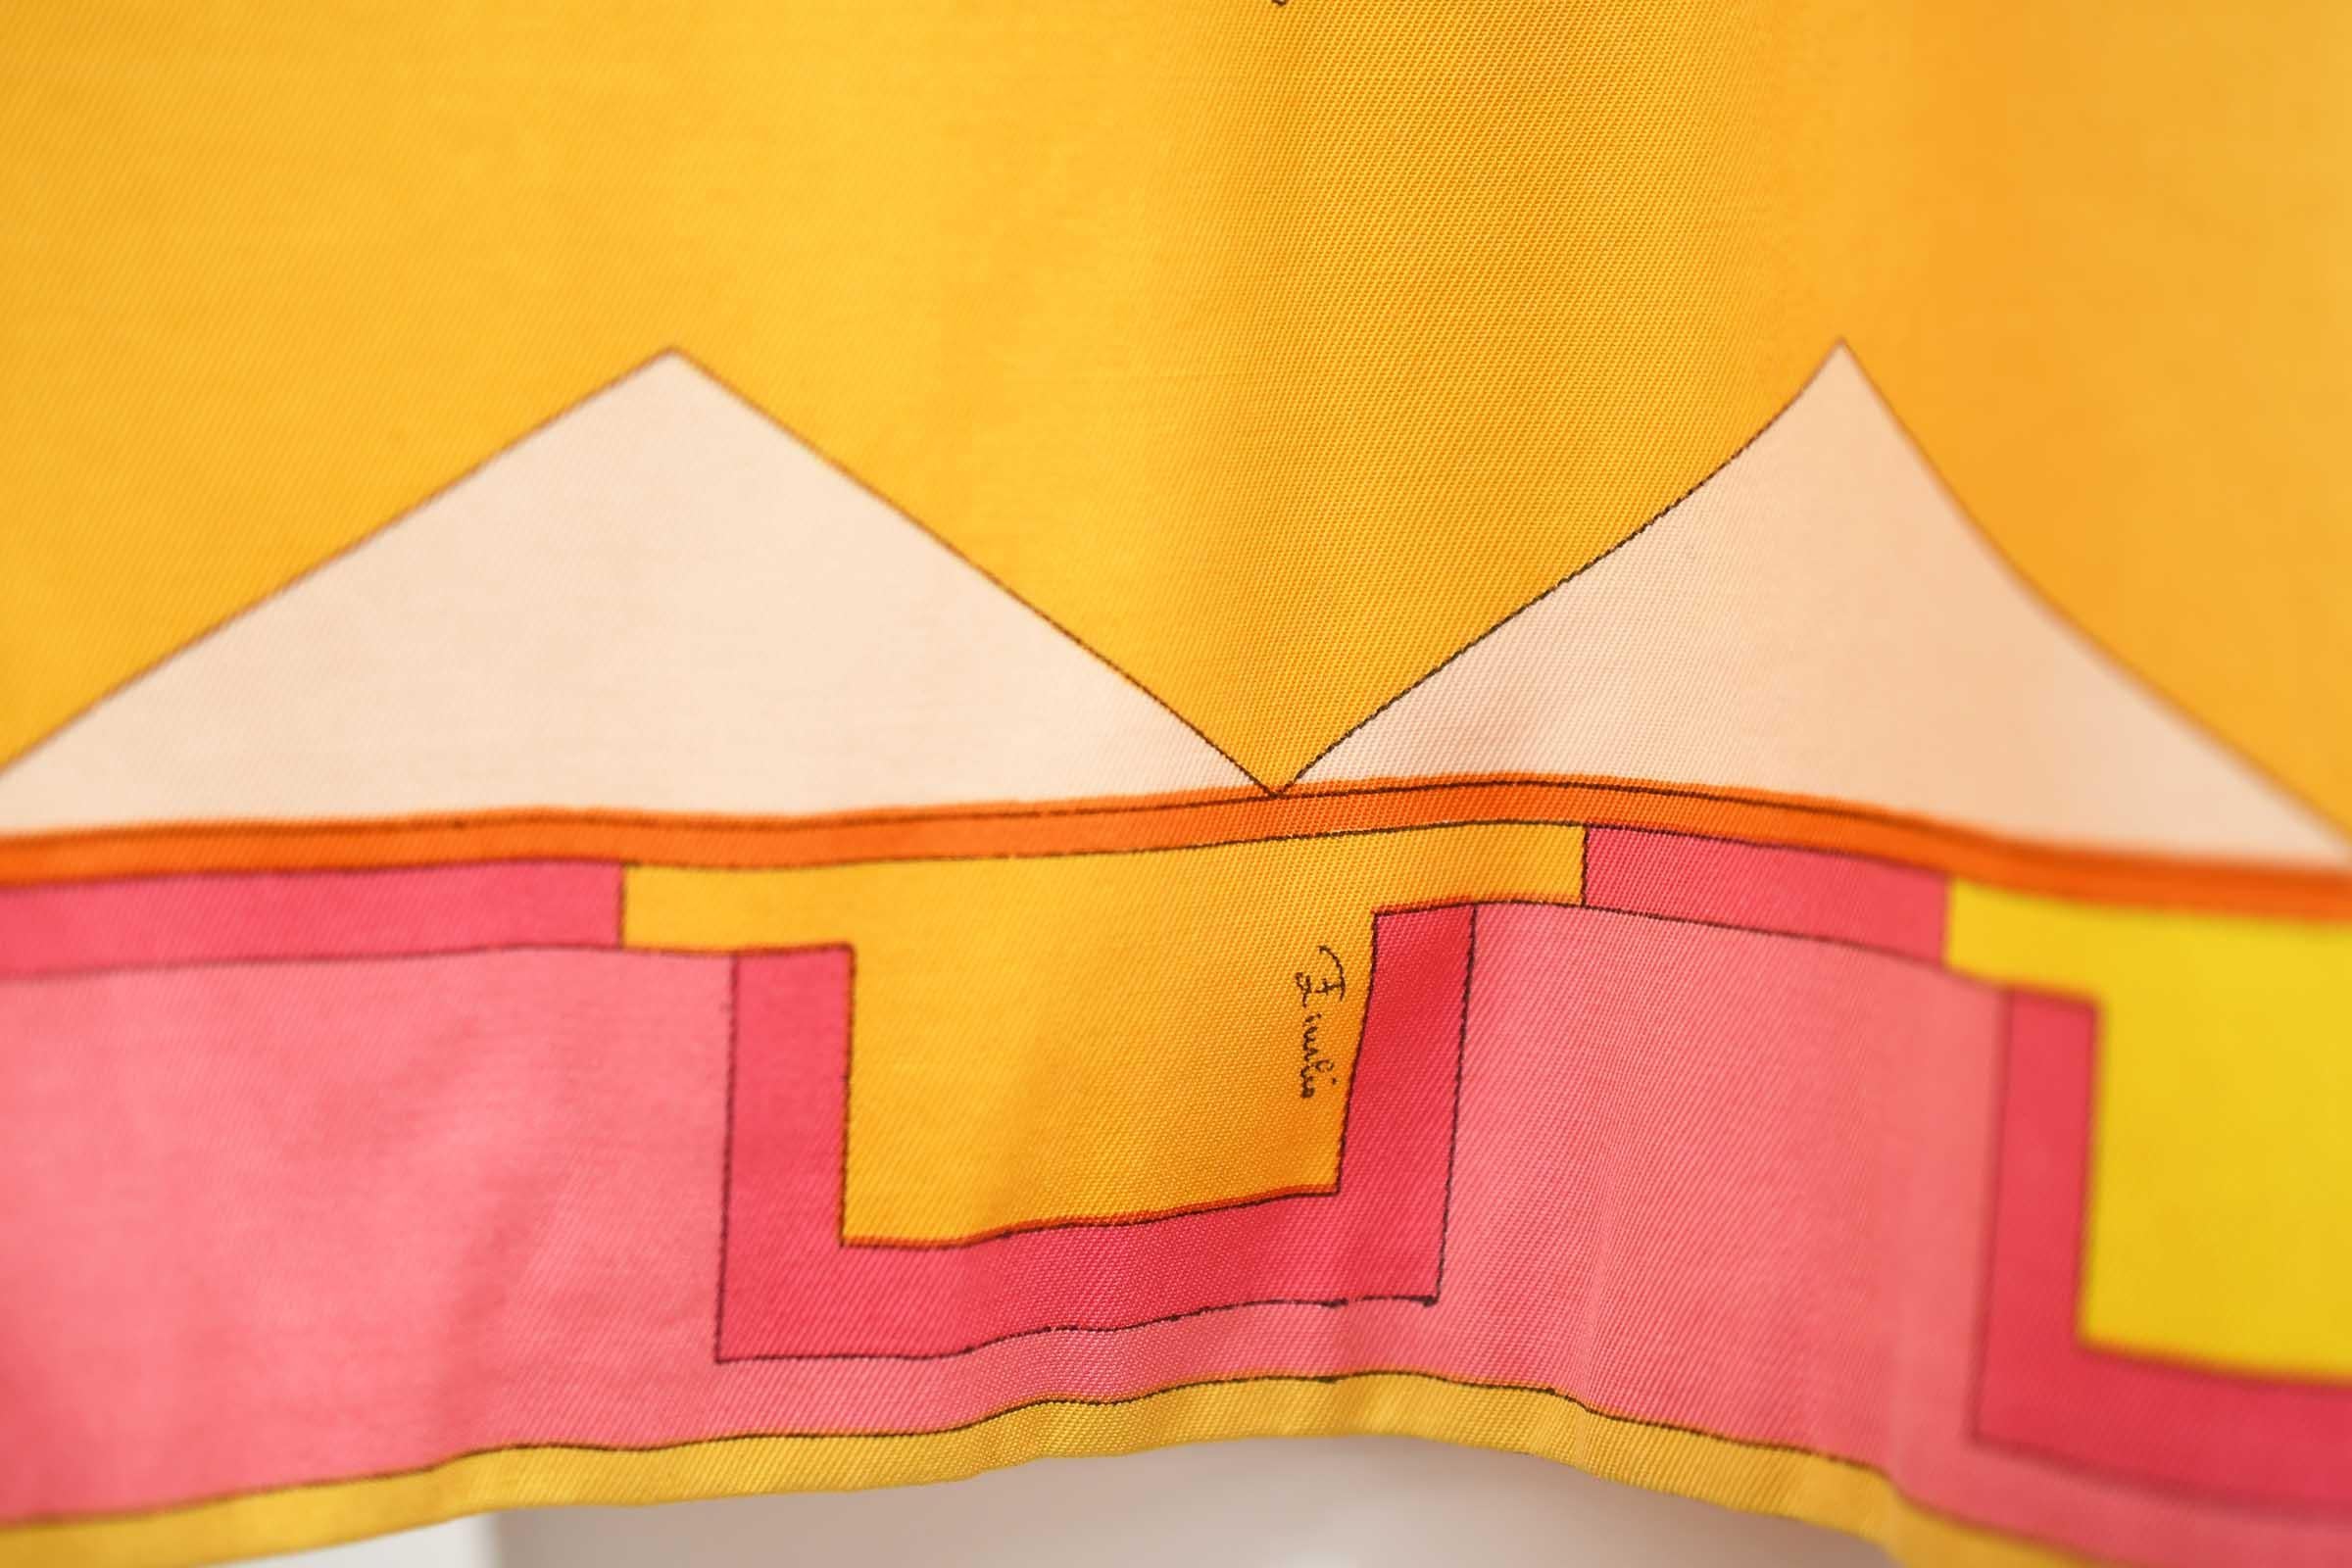 Women's Vintage Pucci Yellow & Pink A-Line Dress - Size 4/6 For Sale